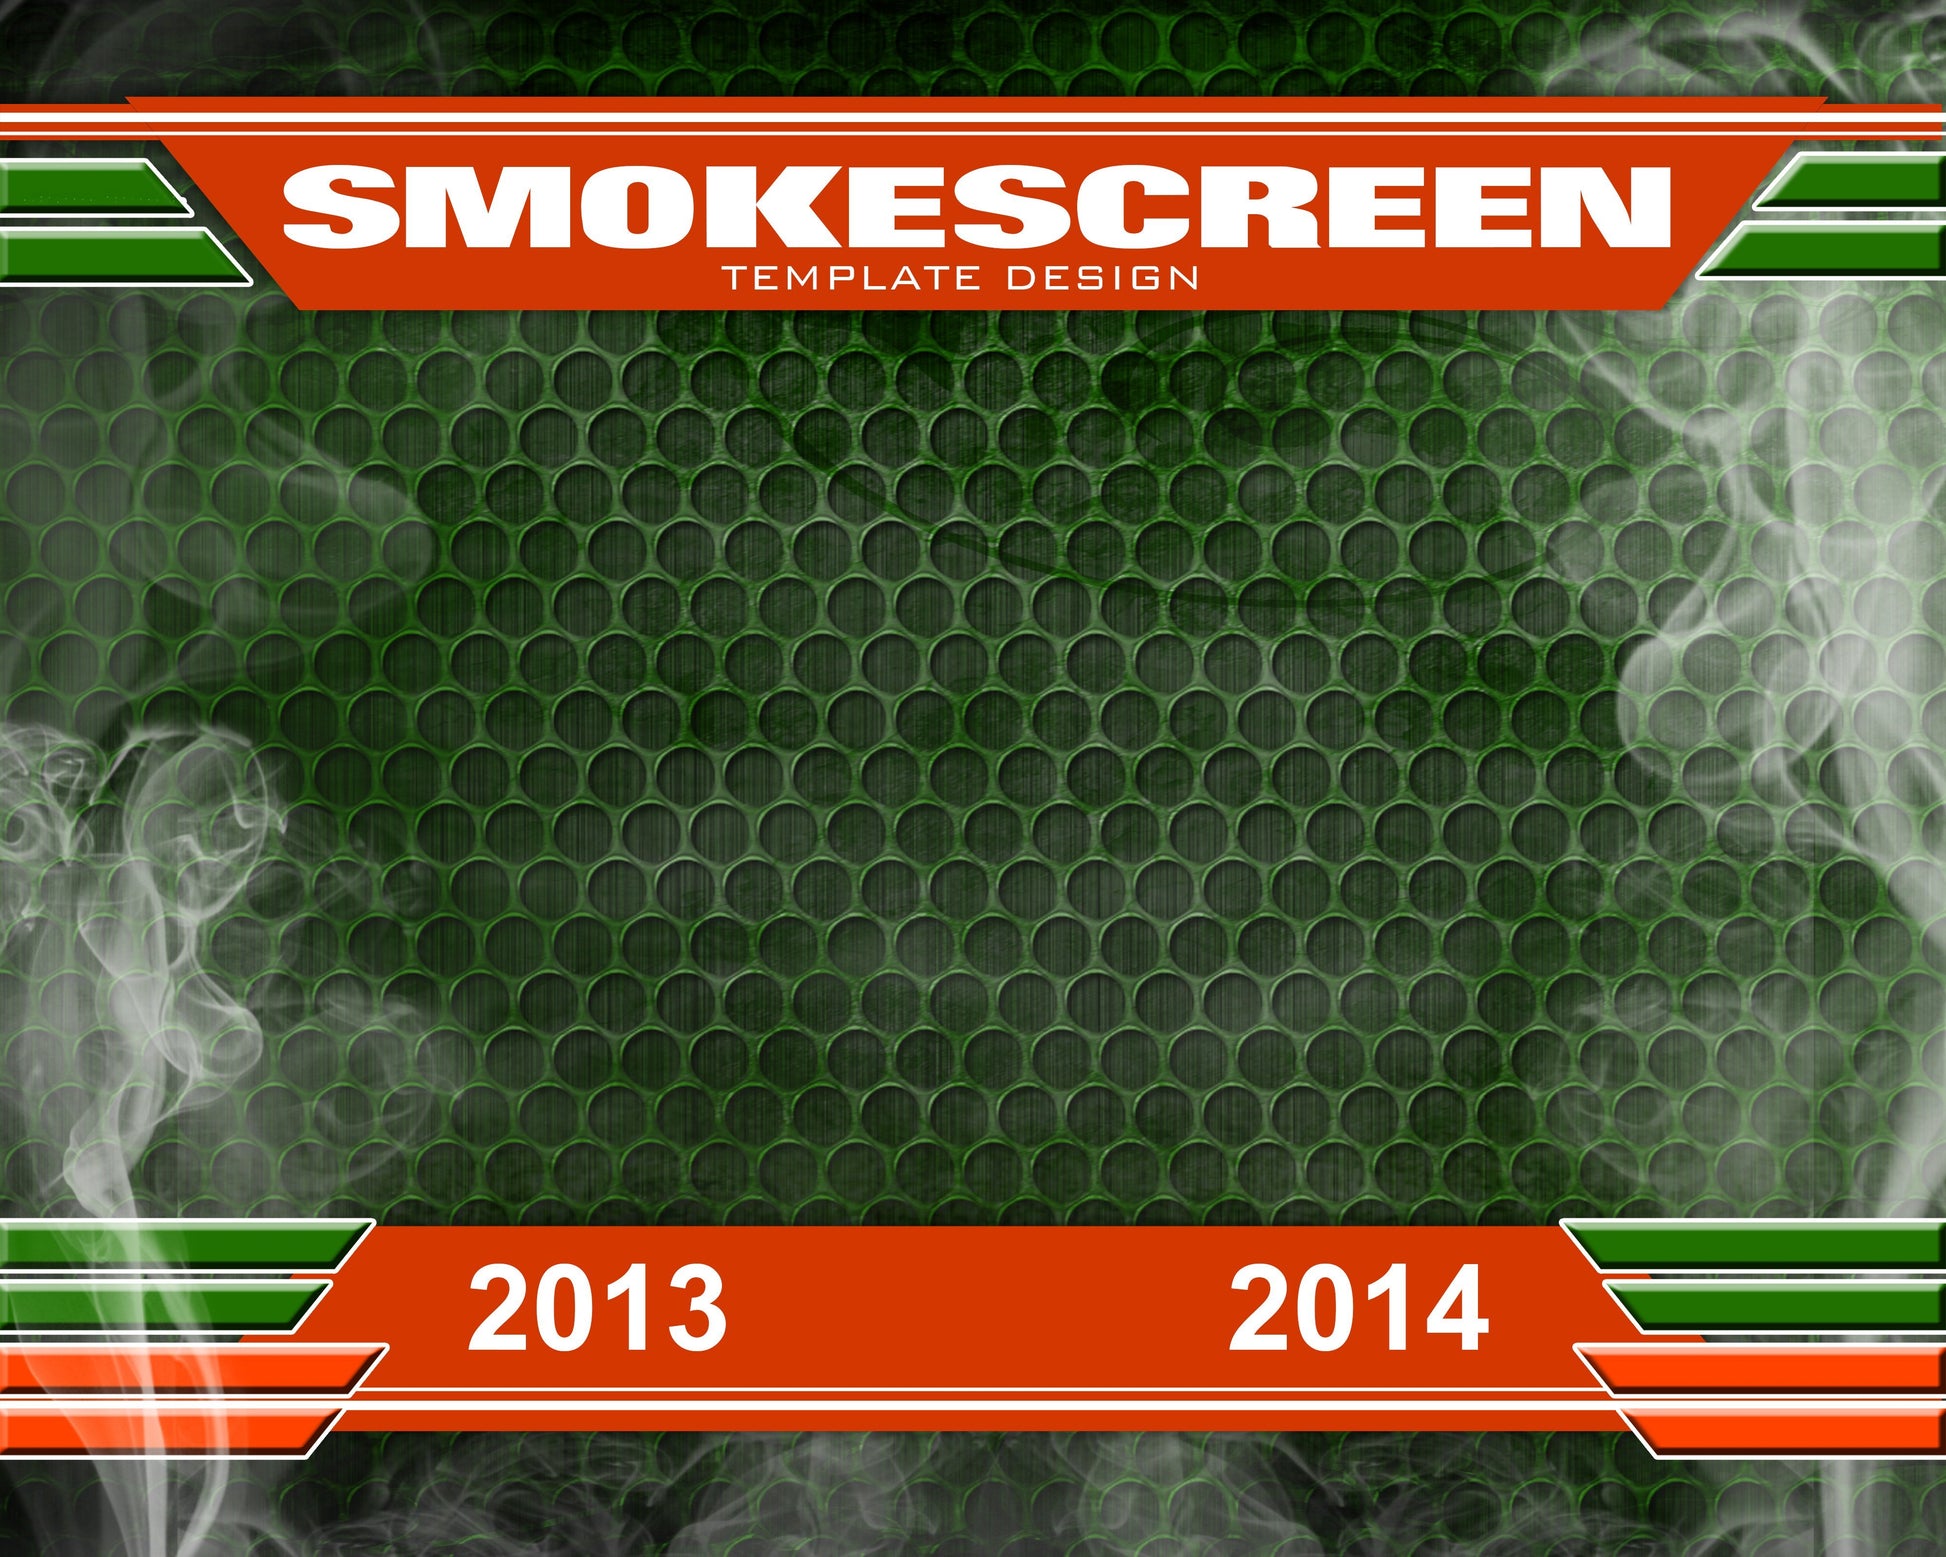 Smoke Screen v.1 - Xtreme Team-Photoshop Template - Photo Solutions